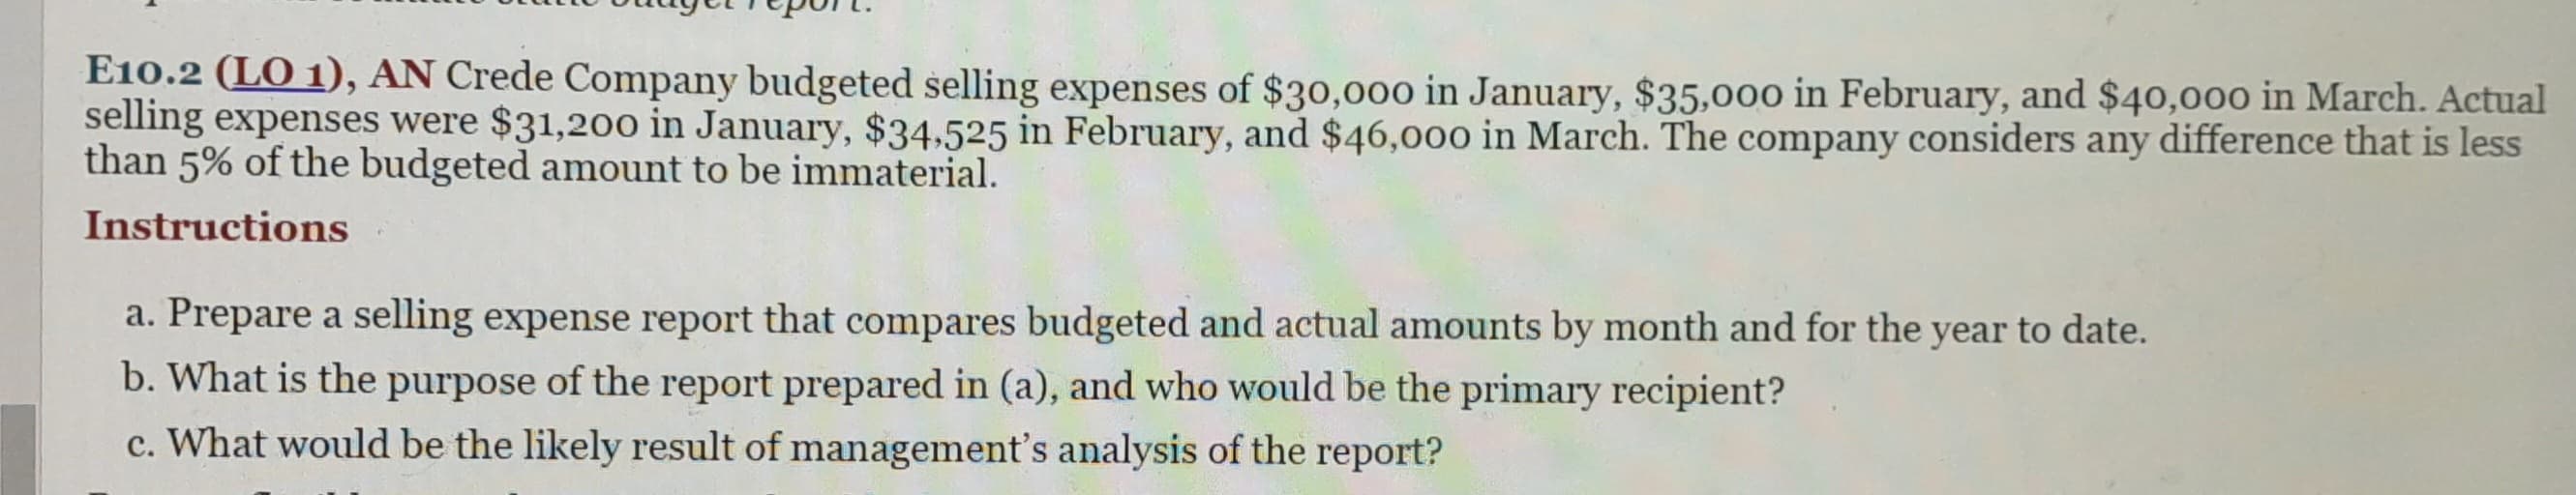 E10.2 (LO 1), AN Crede Company budgeted selling expenses of $30,000 in January, $35,000 in February, and $40,000 in March. Actual
selling expenses were $31,200 in January, $34,525 in February, and $46,000 in March. The company considers any difference that is less
than 5% of the budgeted amount to be immaterial.
Instructions
a. Prepare a selling expense report that compares budgeted and actual amounts by month and for the year to date.
b. What is the purpose of the report prepared in (a), and who would be the primary recipient?
c. What would be the likely result of management's analysis of the report?